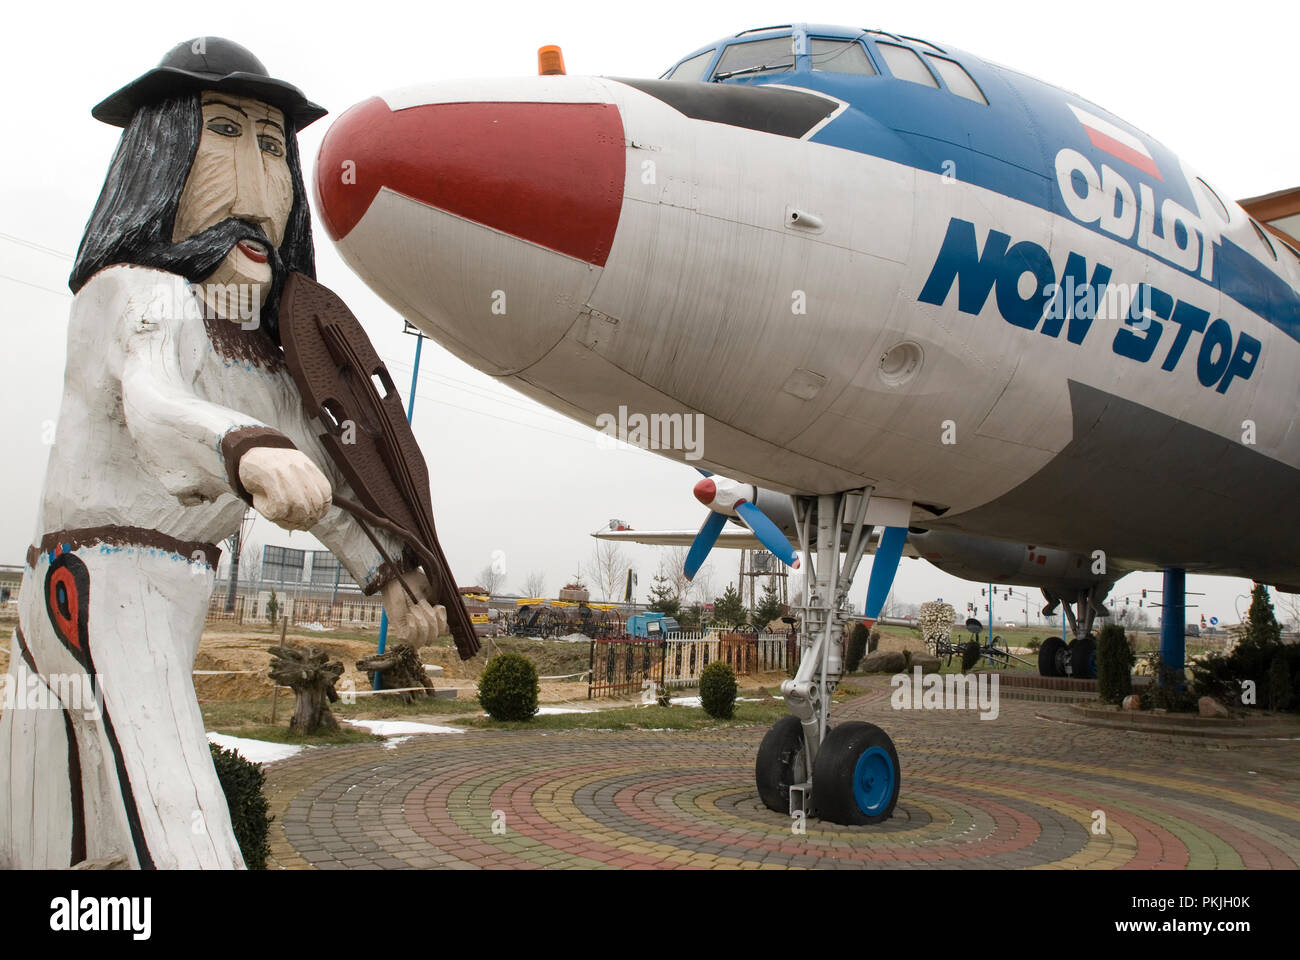 Old passenger airplane converted into a novelty restuarant, south of Warsaw, Poland, Feb 2007 Stock Photo